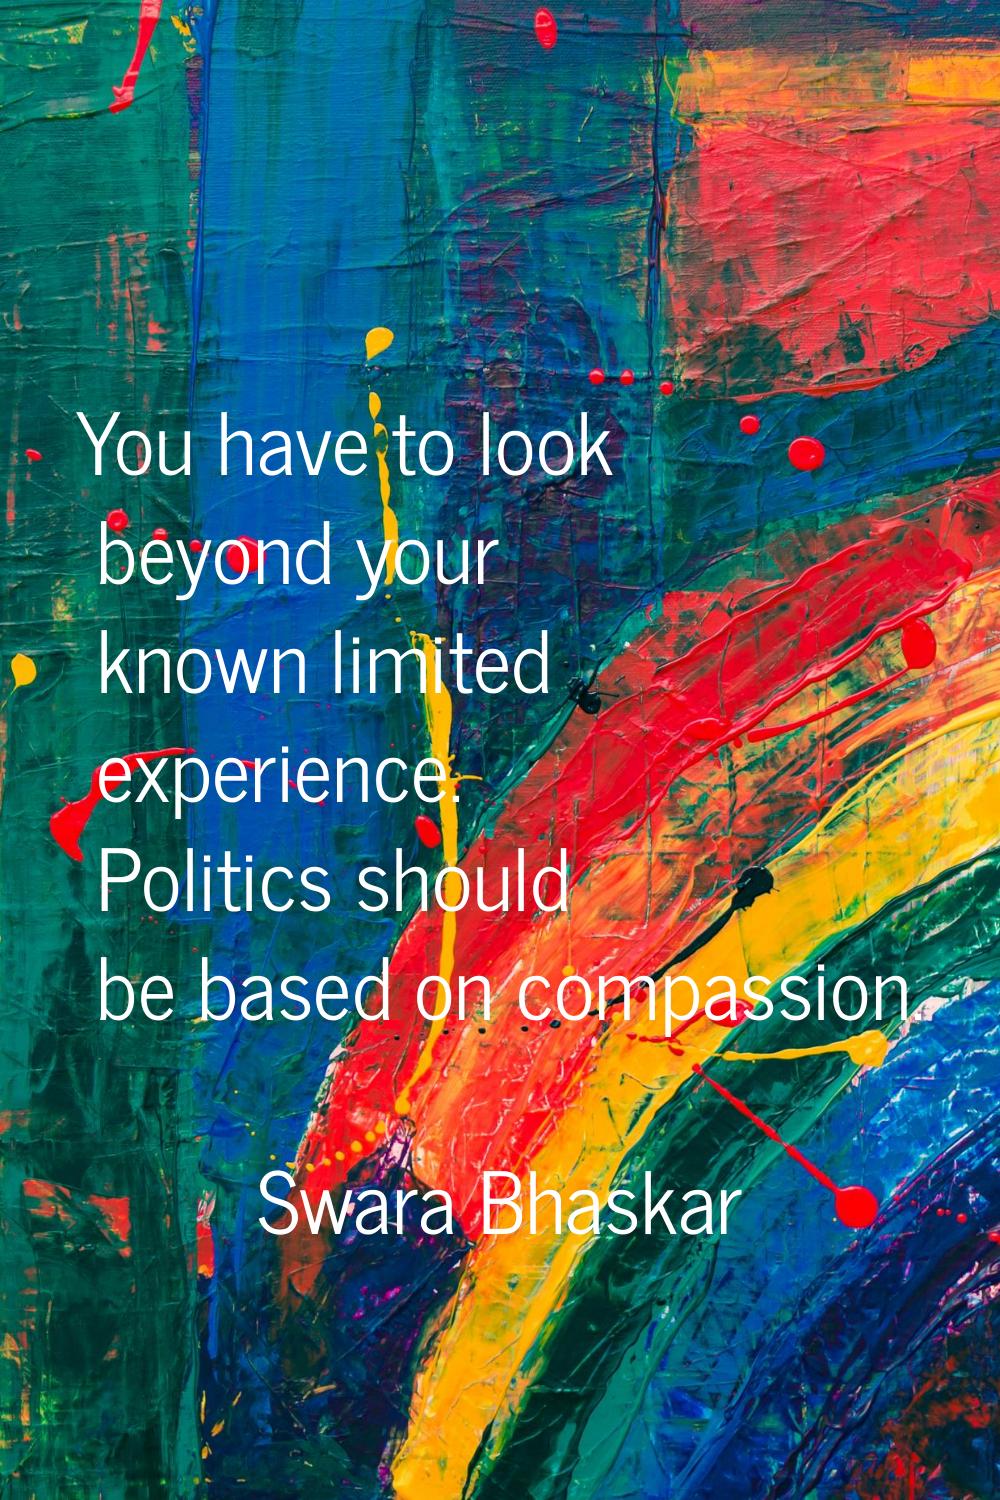 You have to look beyond your known limited experience. Politics should be based on compassion.